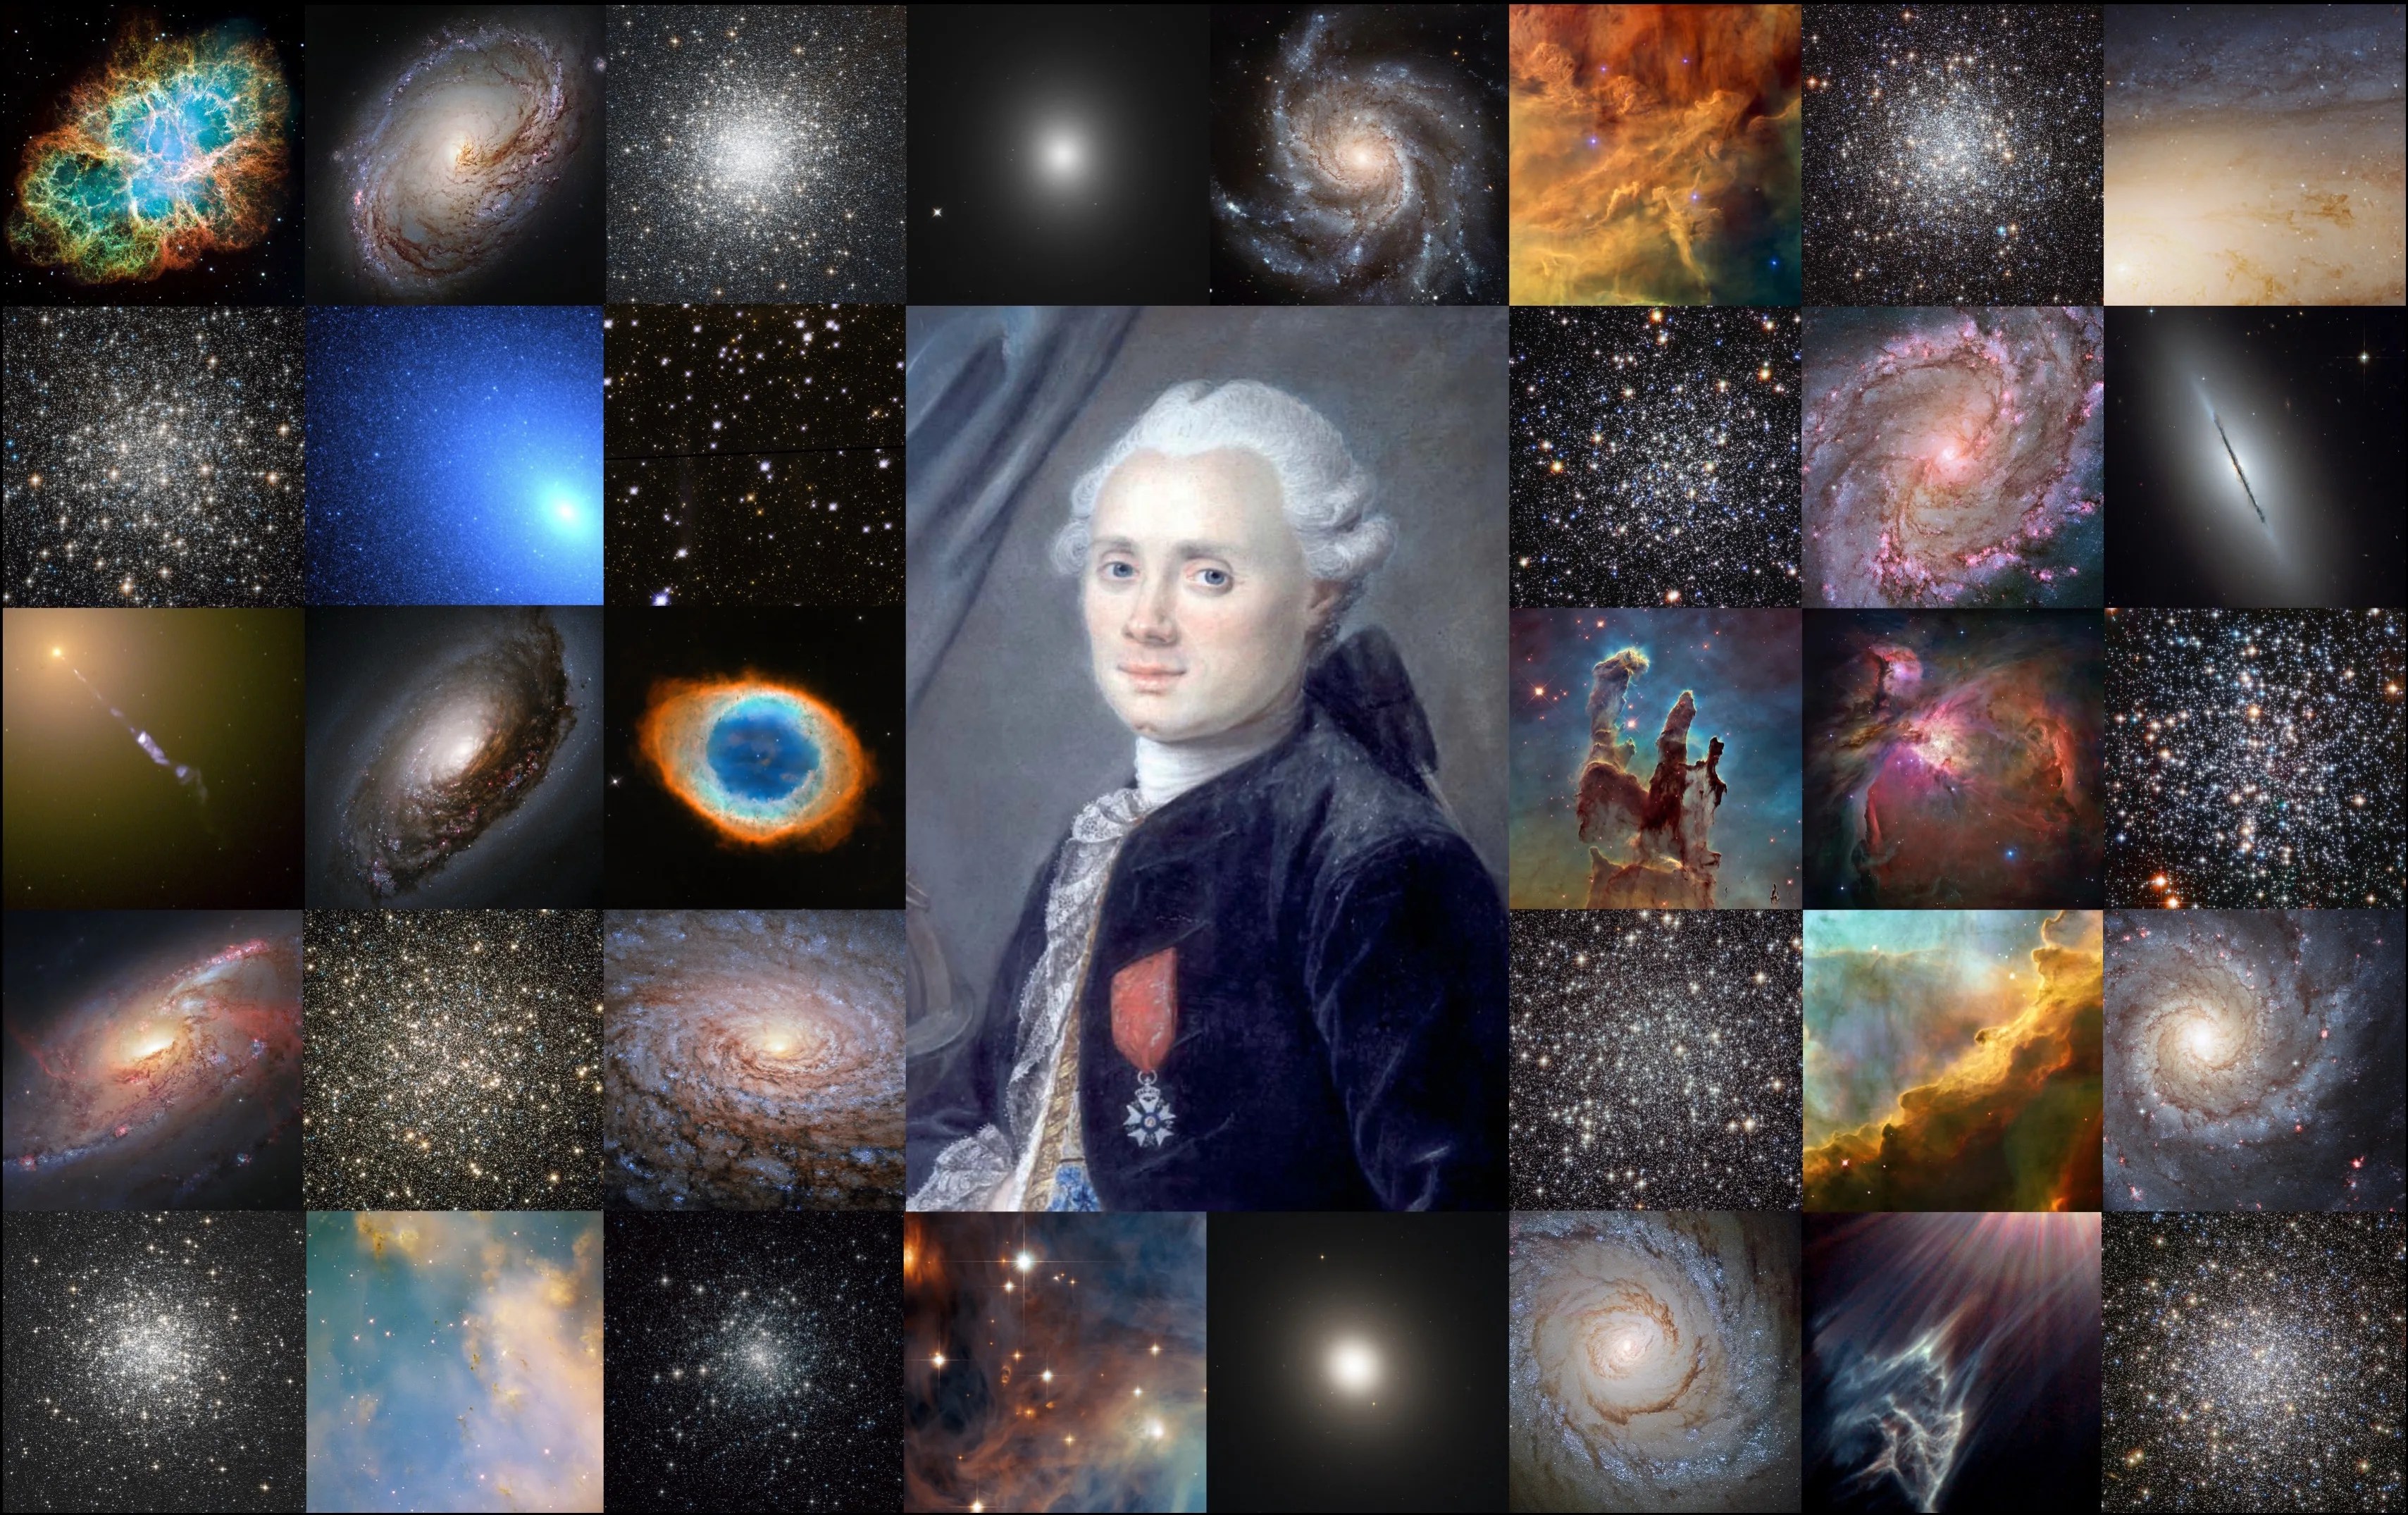 Collage of galaxies and portrait of a man